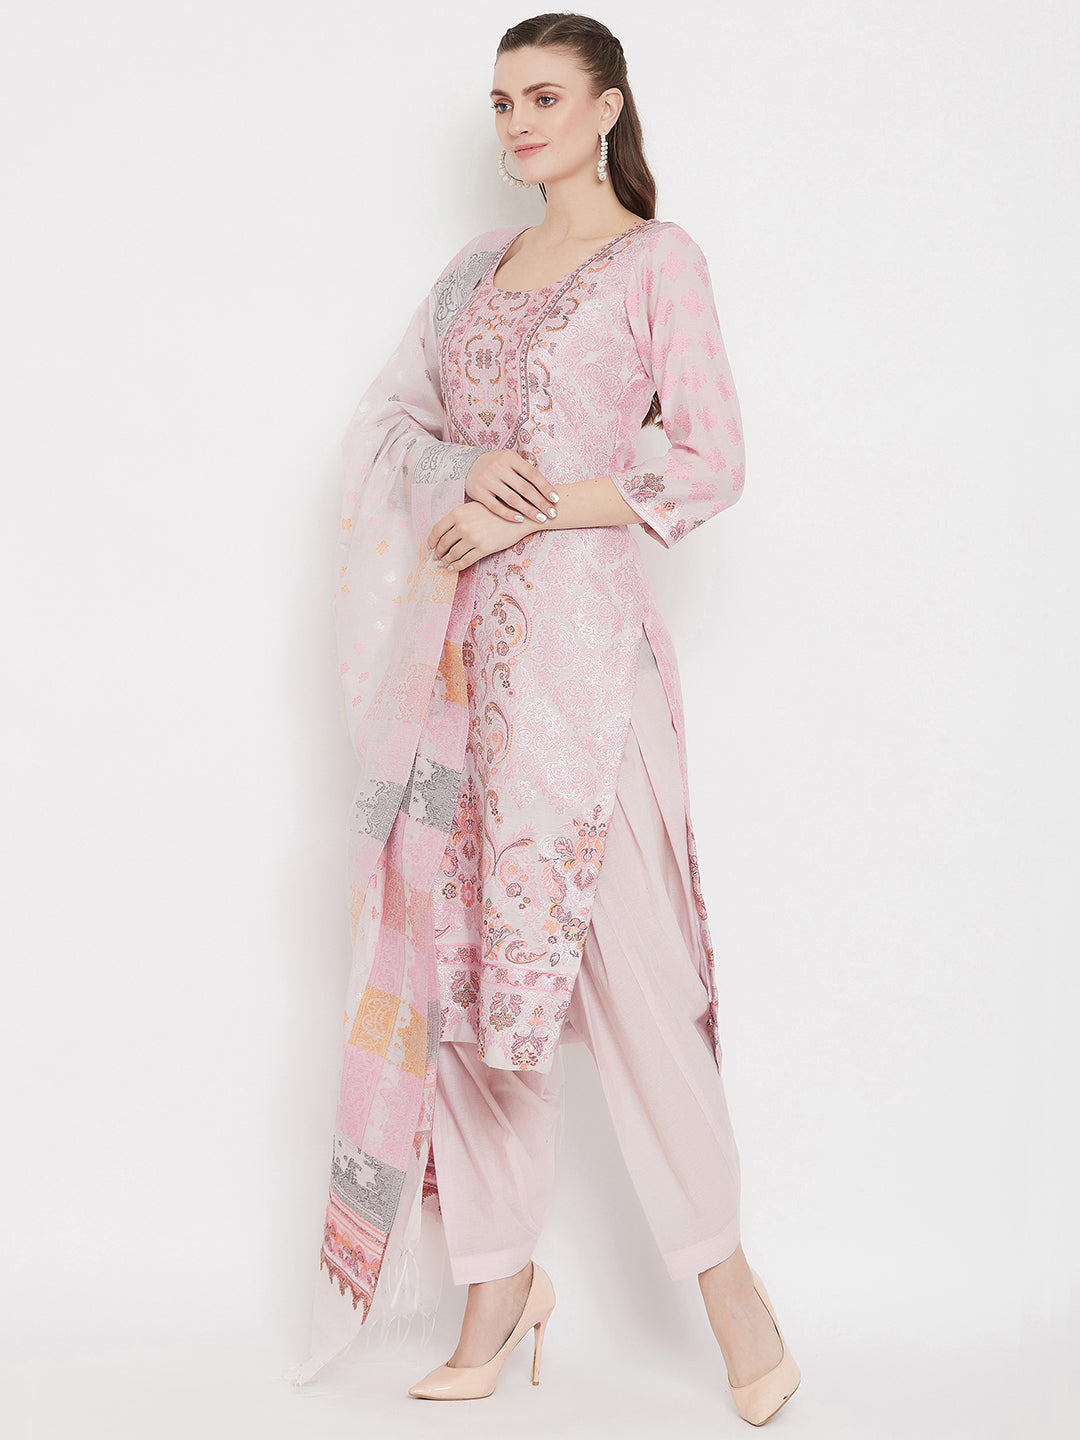 Organic Cotton Woven Pink Dress Material with Dupatta